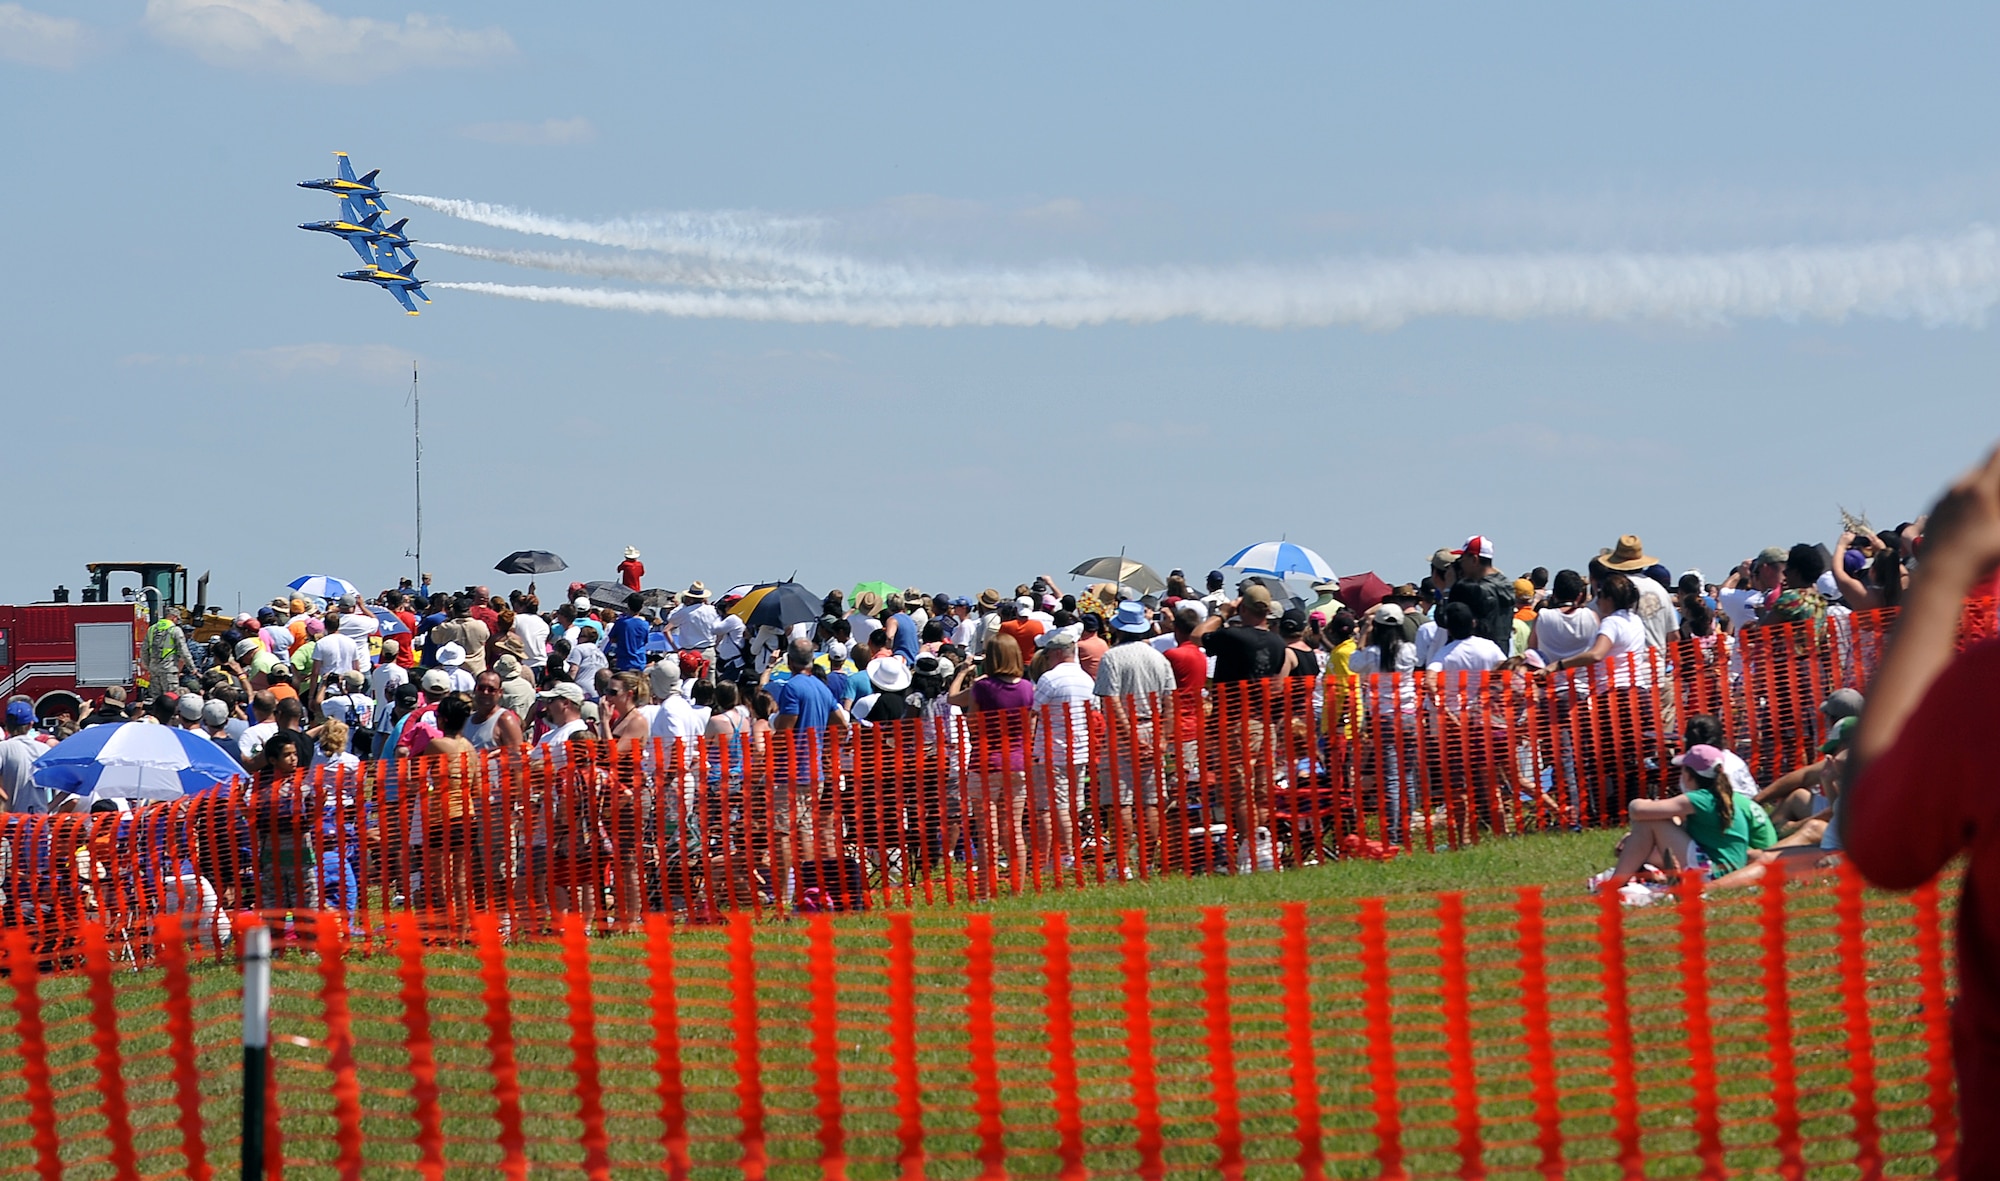 Crowds look on as the Blue Angels perform an aerial demonstration at the 2012 Robins Air Show. (U.S. Air Force photo by Tommie Horton)